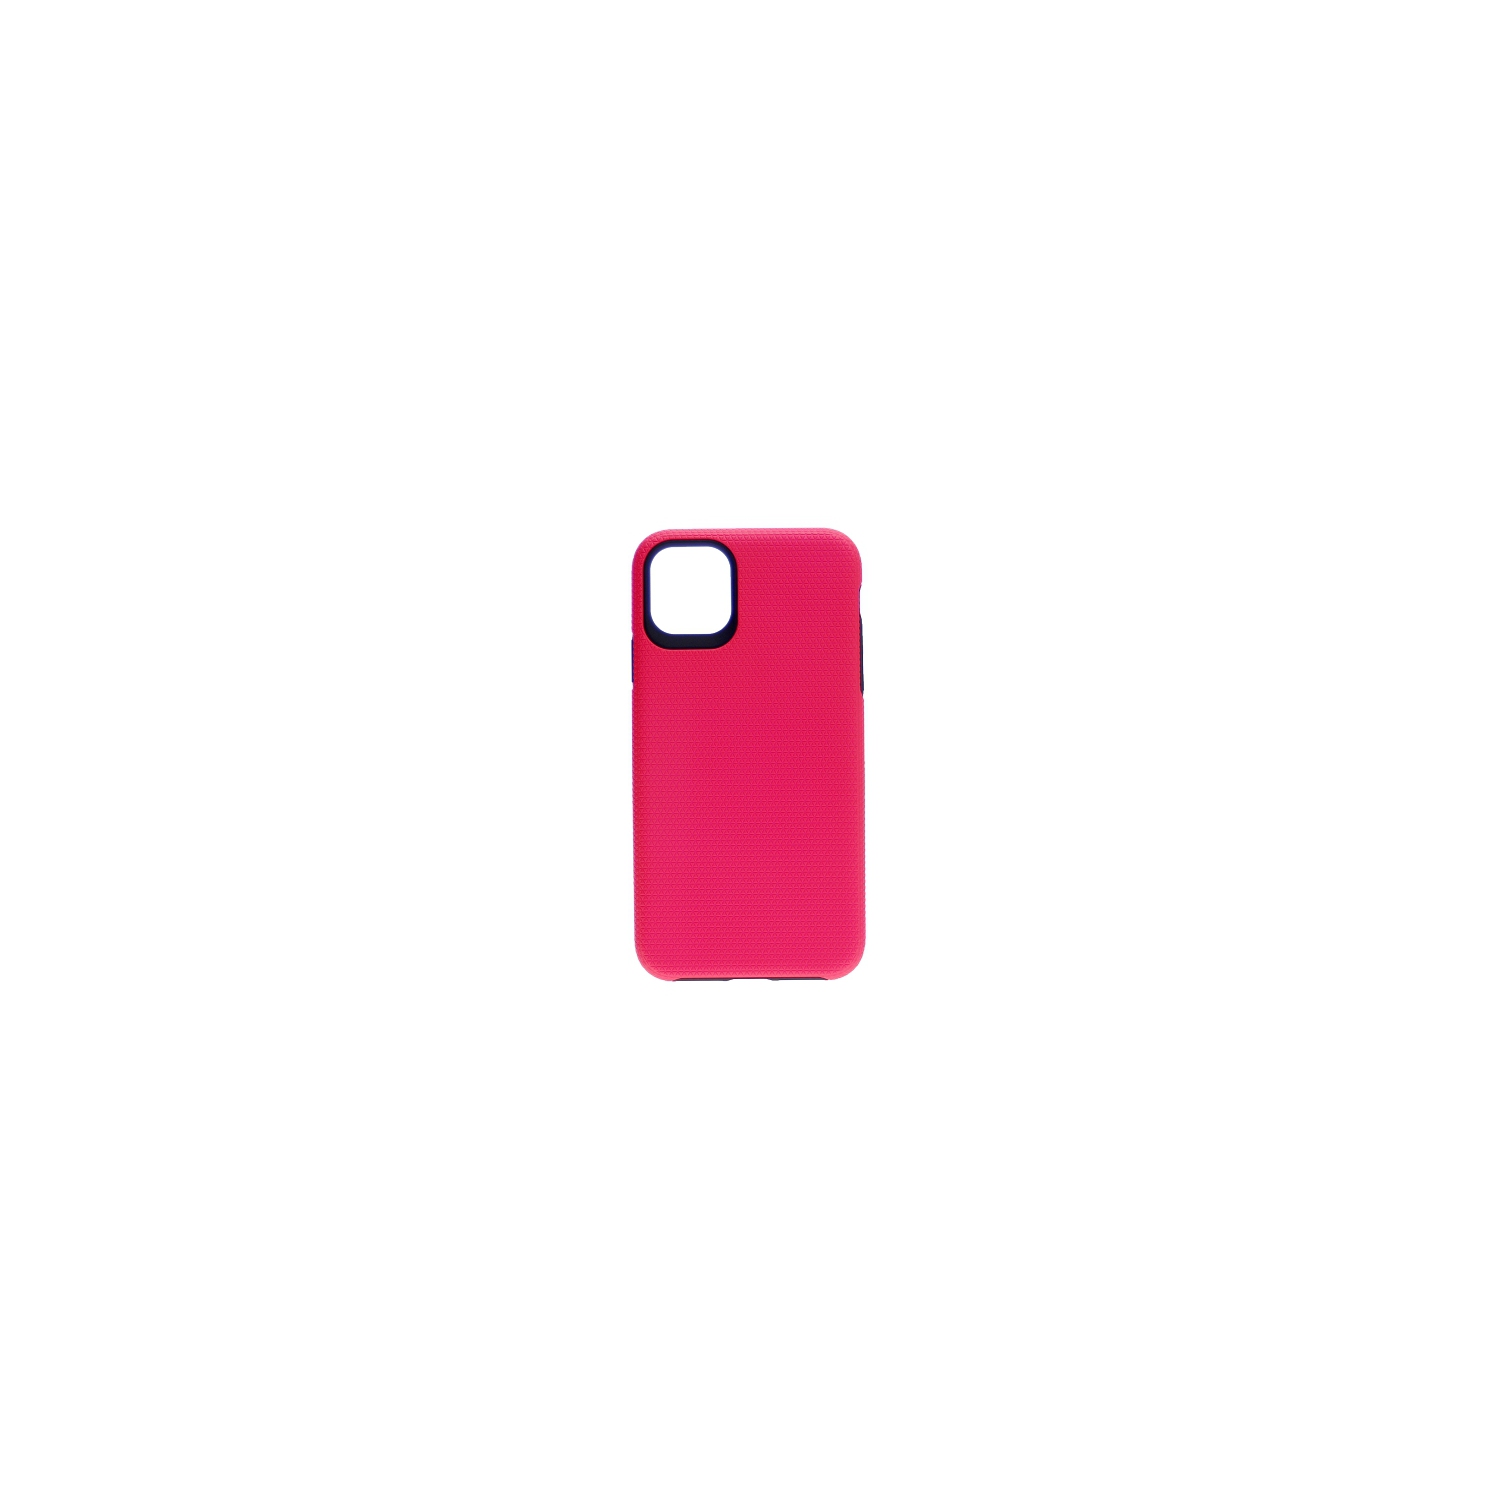 TopSave Triangle Pattern Dual Layer PC+TPU Rugged Armor Case For Iphone 12 Mini, Hot Pink